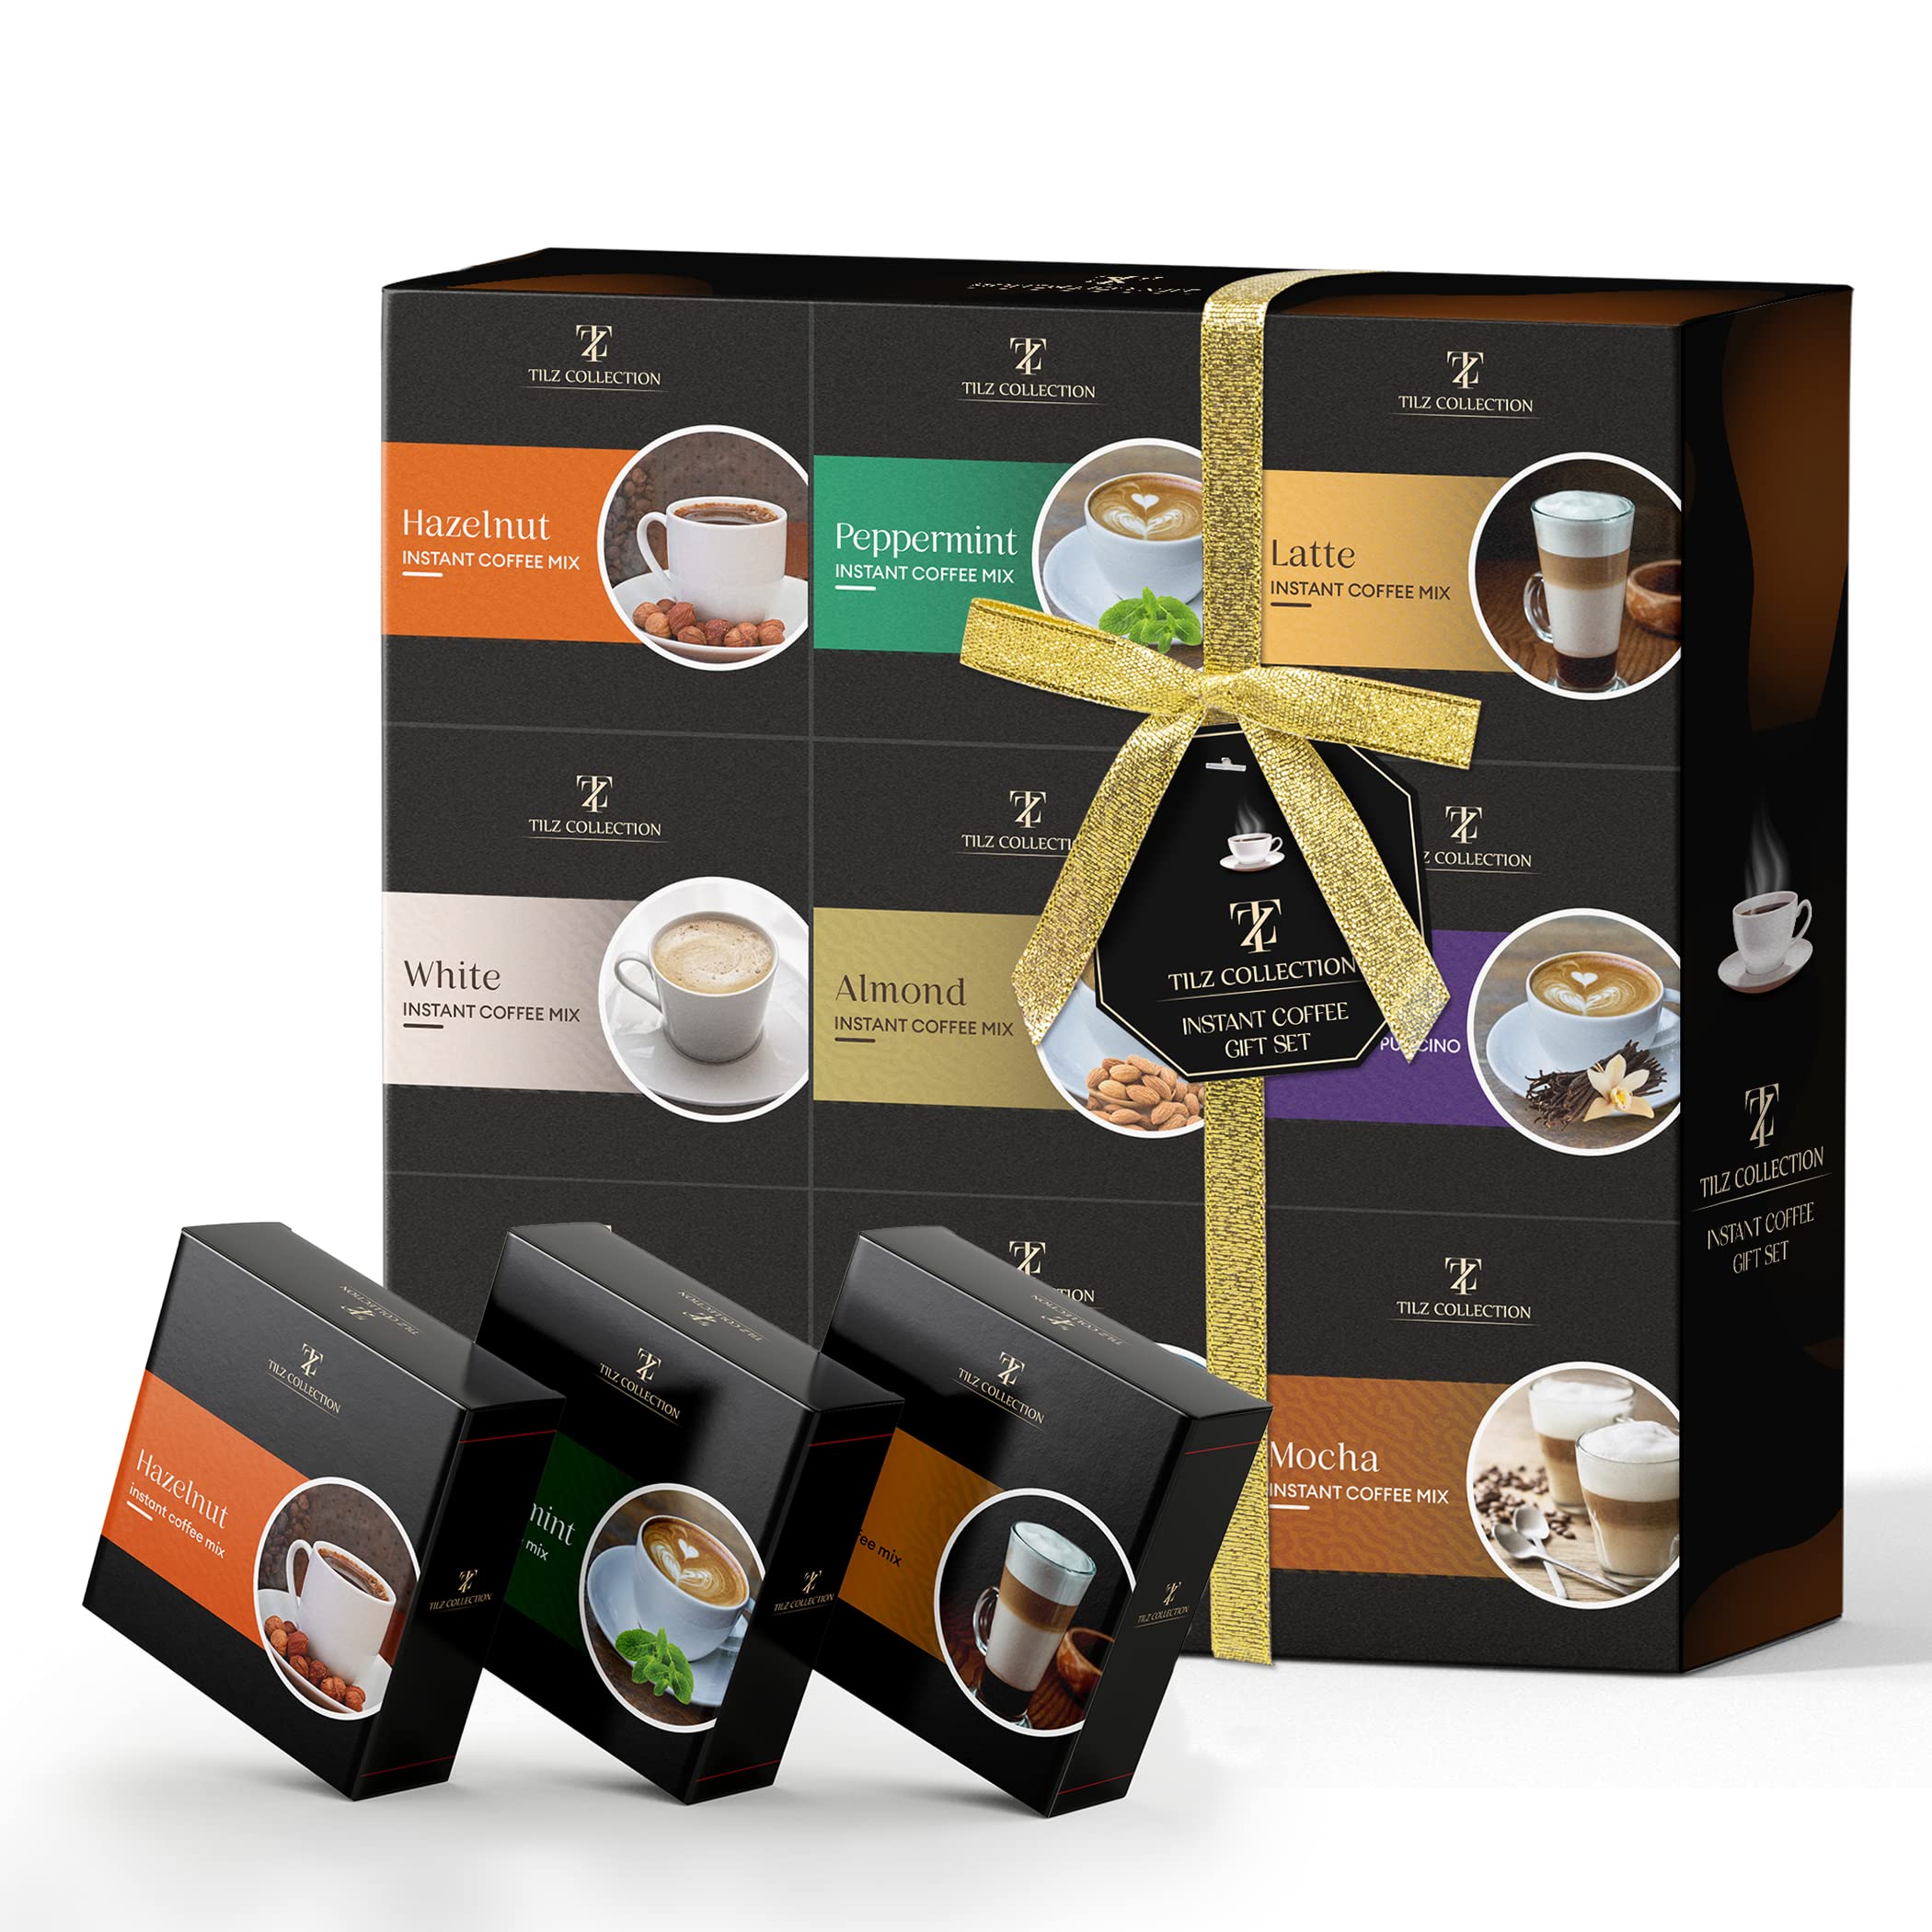 9 Flavored Instant Coffee Gift Set - Perfect Christmas Gifts for Men and Women - Includes Hazelnut, Caramel, French Vanilla, and More!